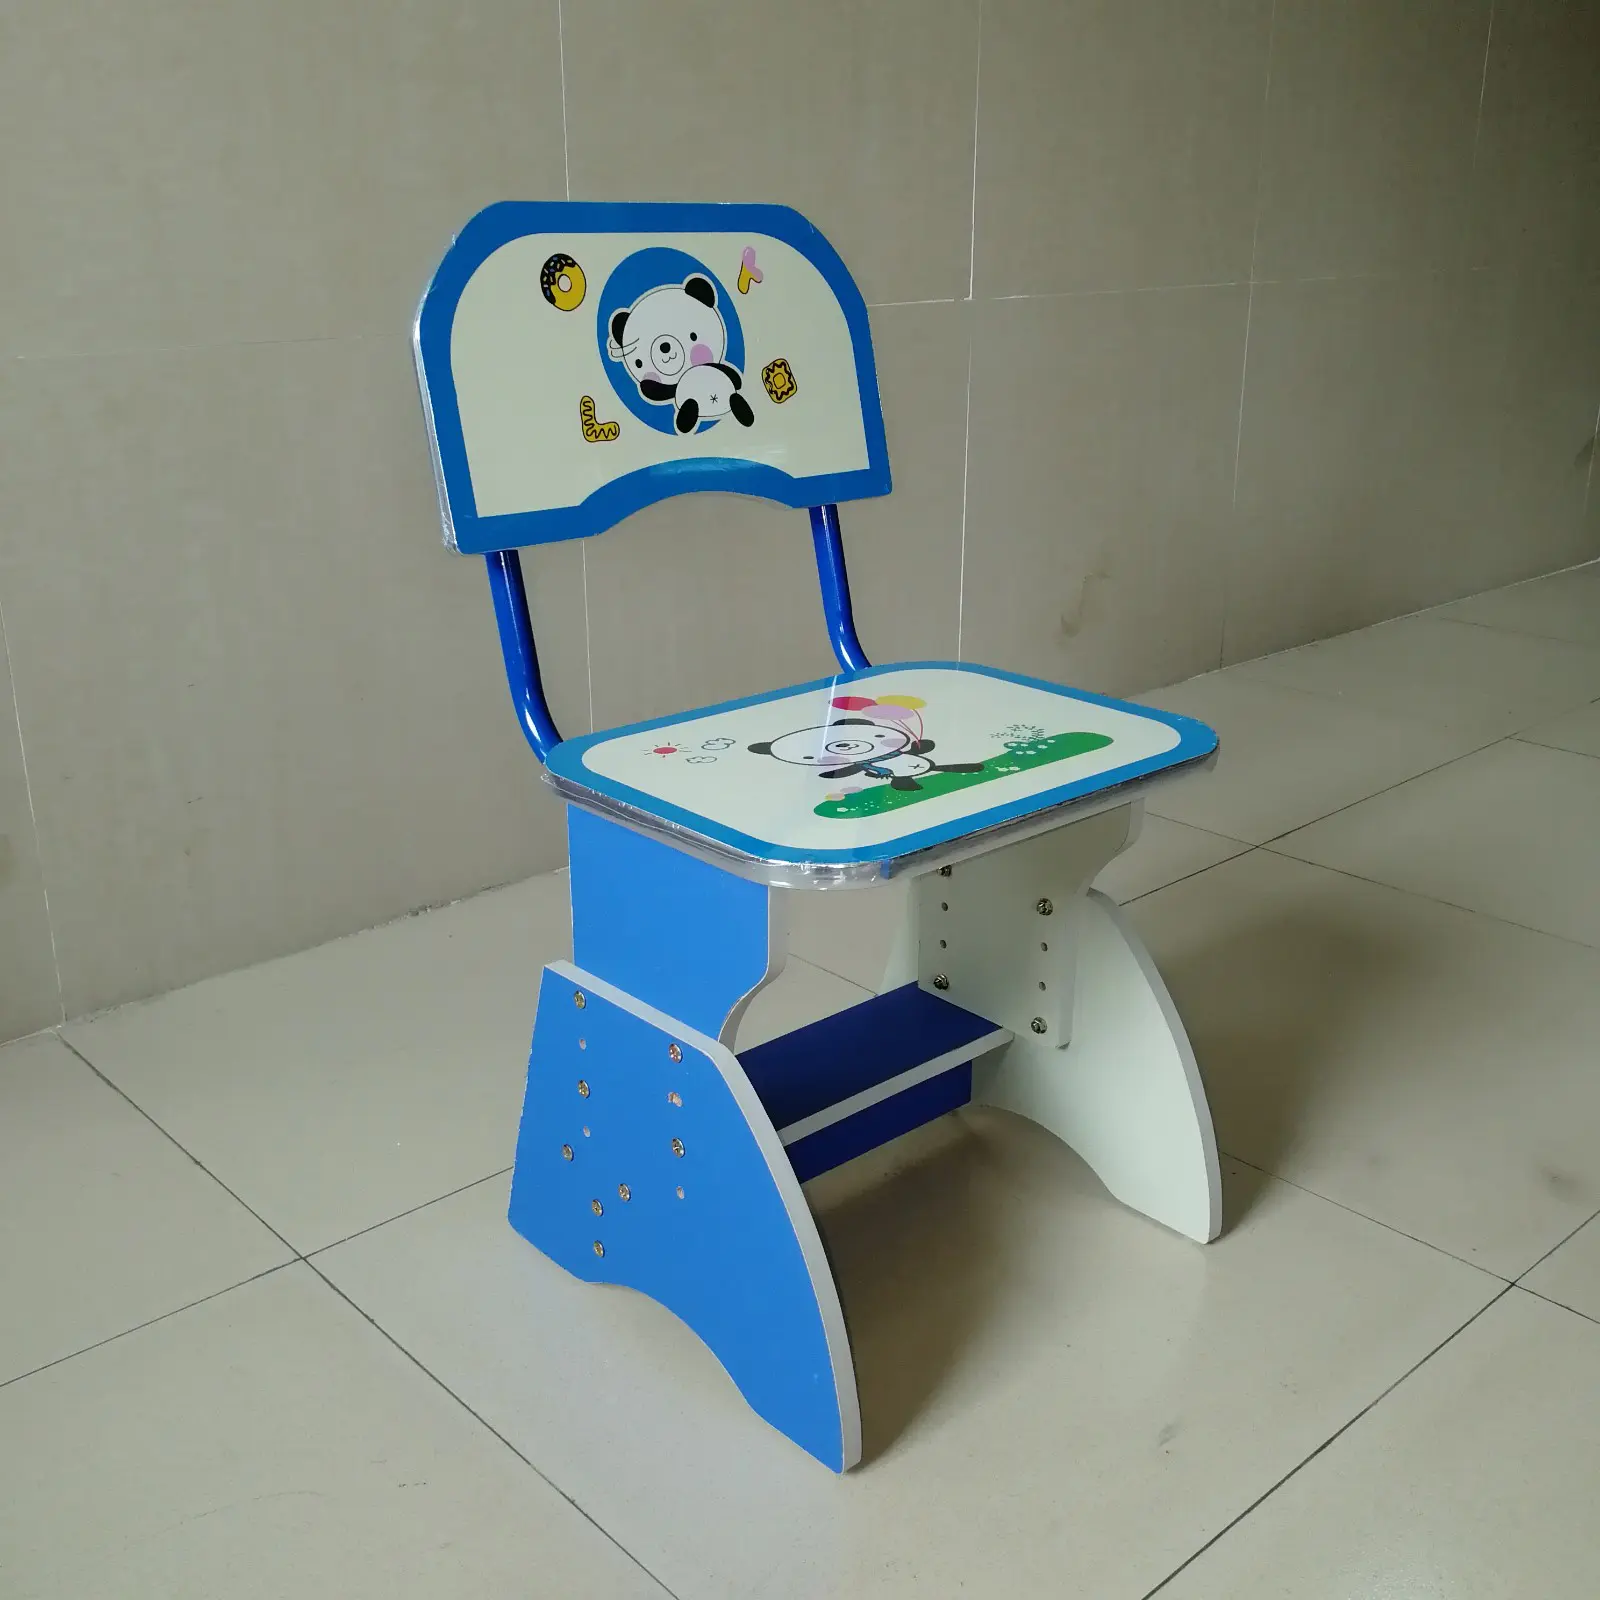 Aoqi excellent youth desk and chair set with good price for home